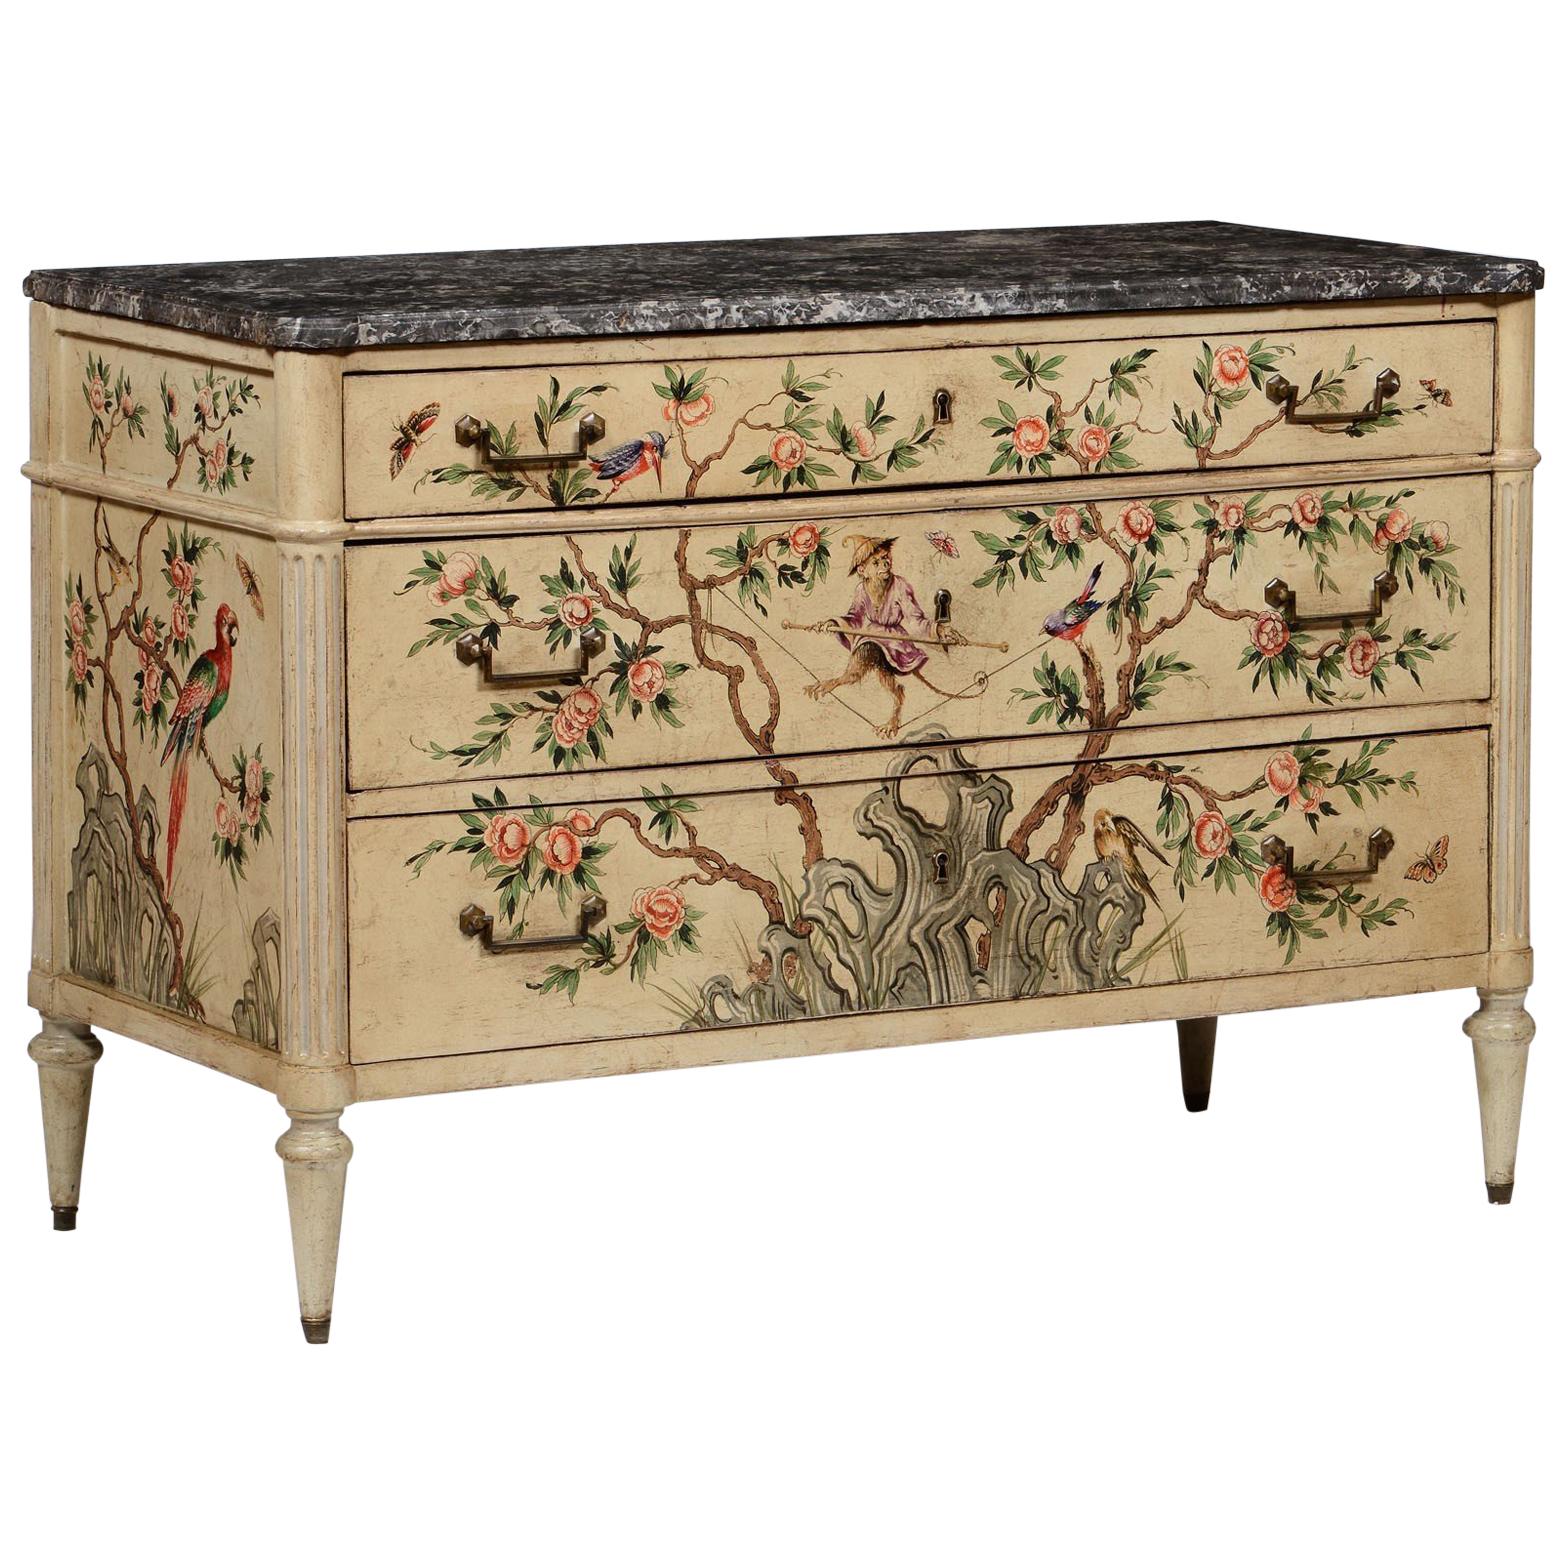 Piedmont Chinoiserie Lacquered Wood Chest of Drawers, 18th Century